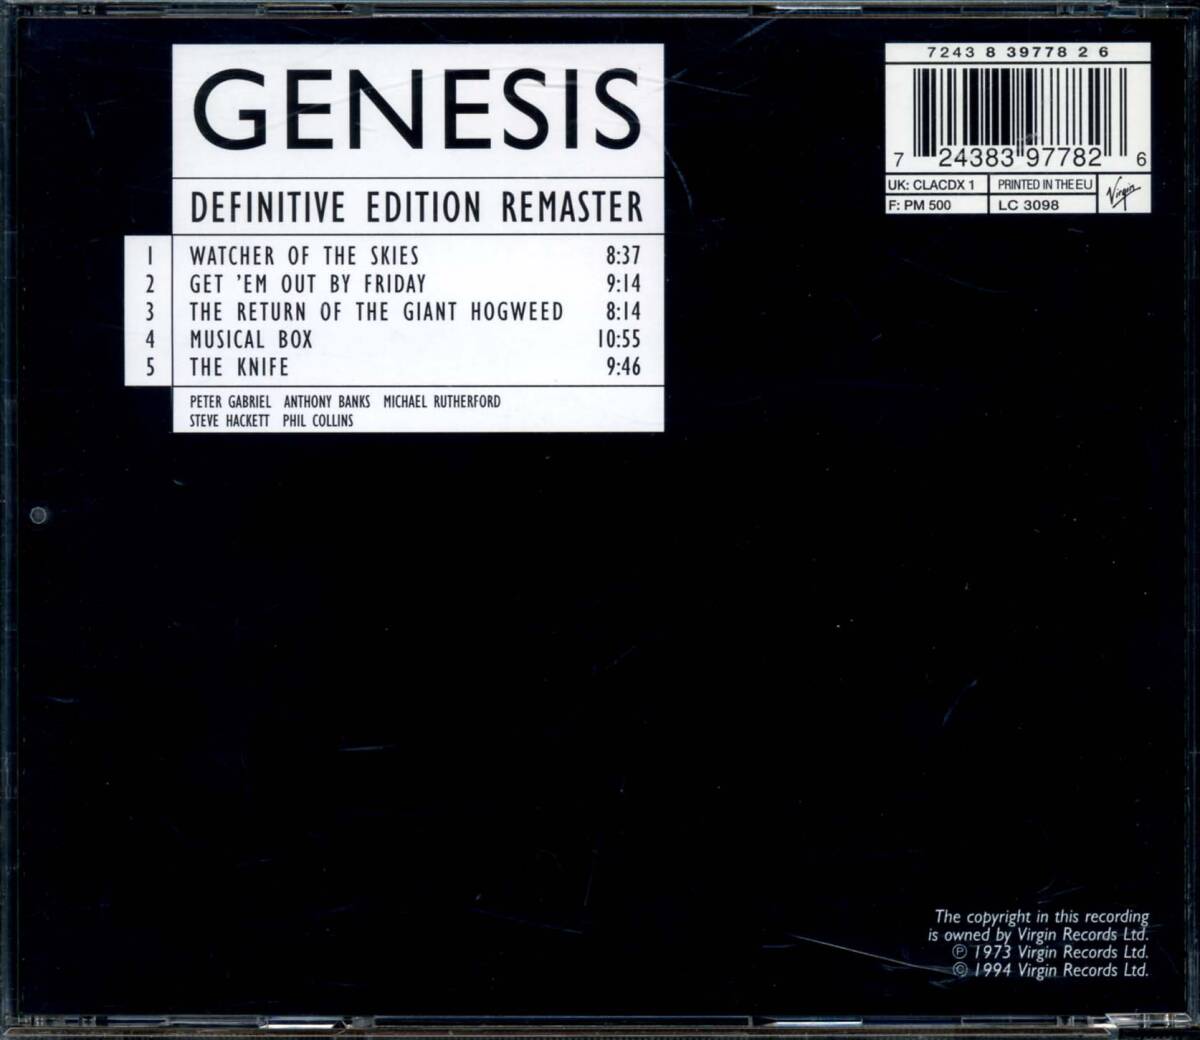 GENESIS★Live [ジェネシス,Mike Rutherford,Peter Gabriel,Phil Collins,Steve Hackett,Tony Banks,ピーター ガブリエル]_画像2